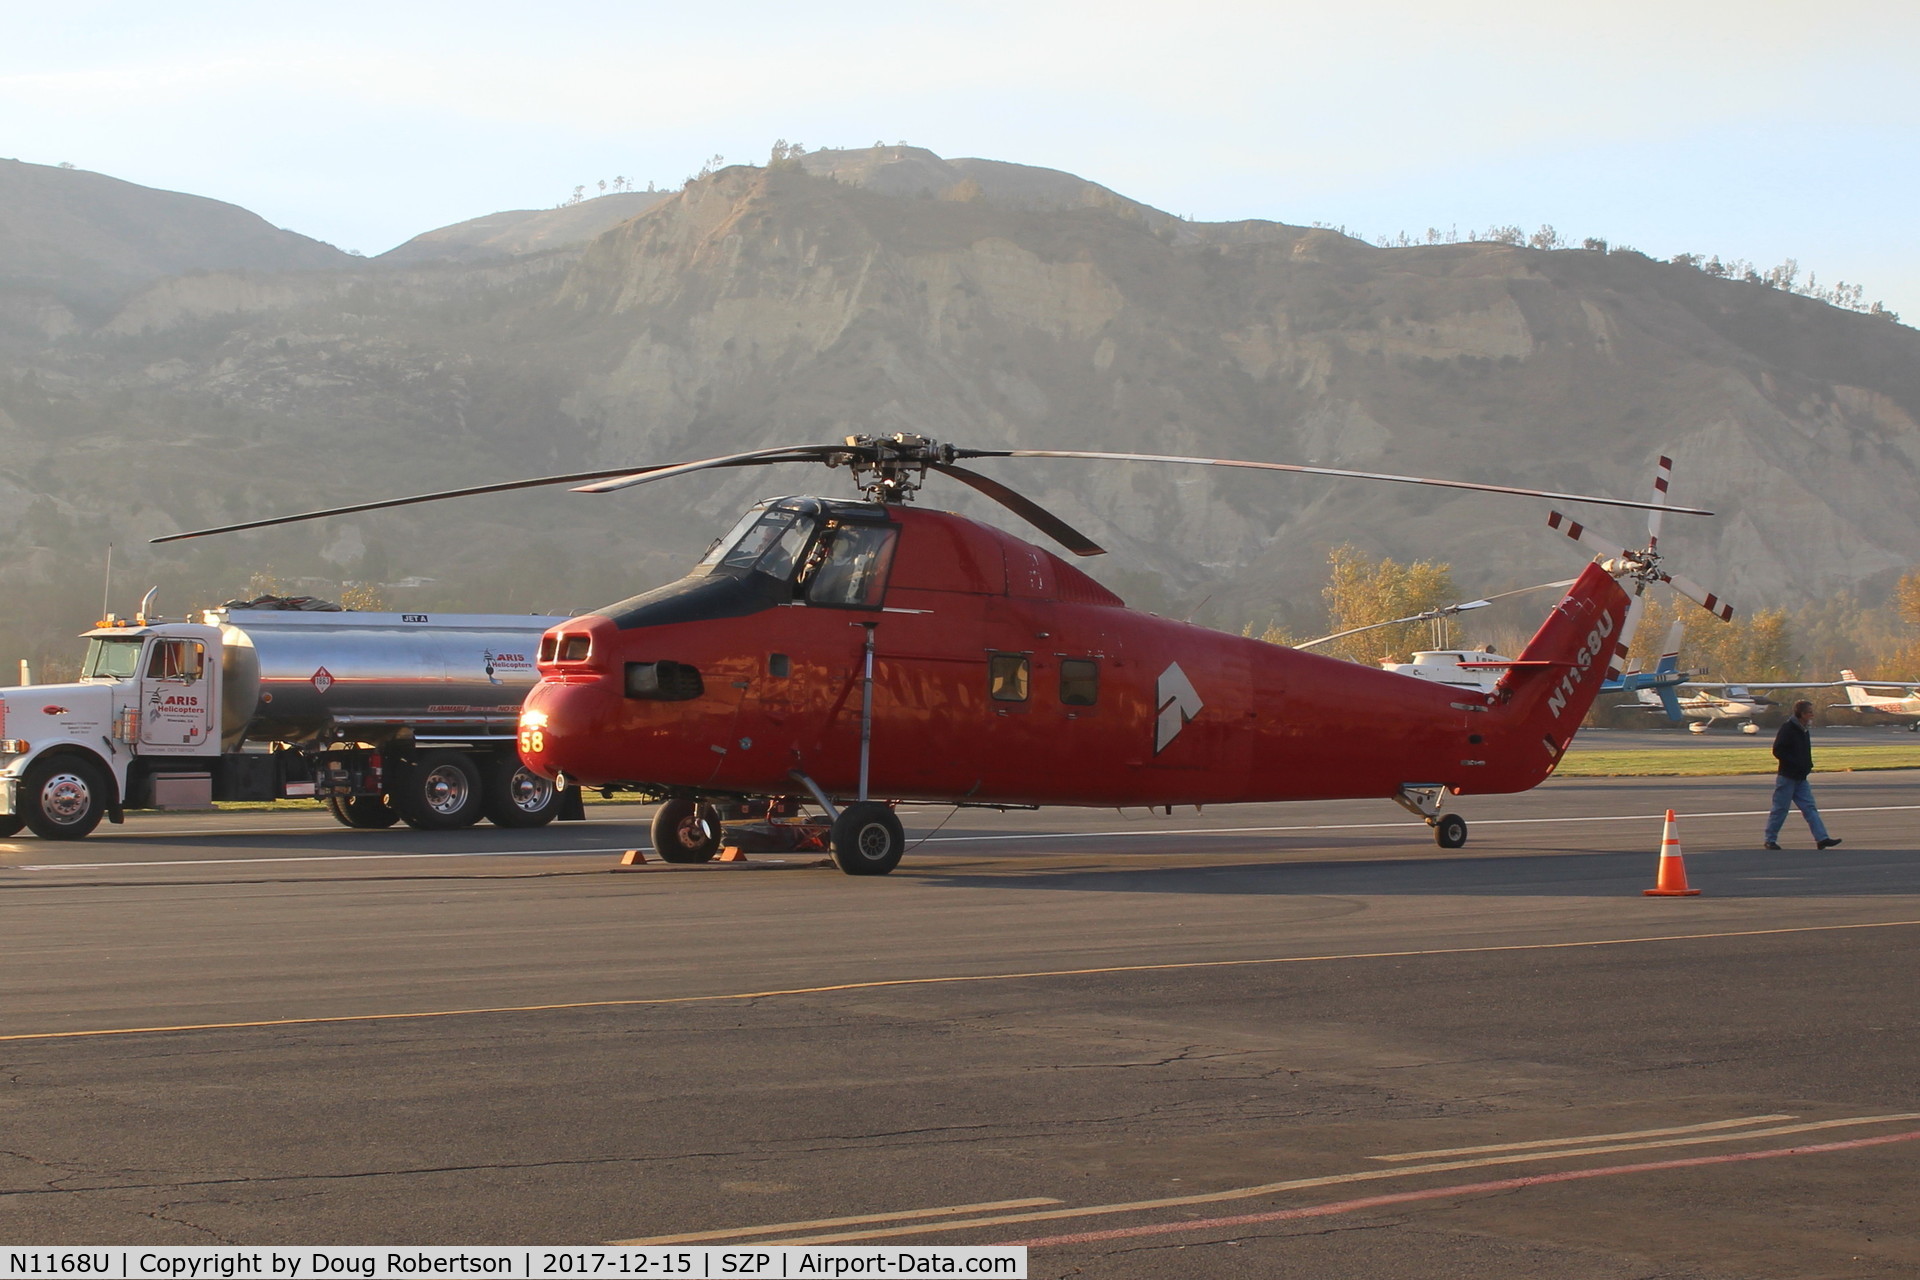 N1168U, 1958 Sikorsky S-58ET C/N 58-1070, 1958 Sikorsky S-58T, one P&W(C)PT6T-3 1,875 SHp Turboprop conversion Firebomber, supporting the Thomas fire fight